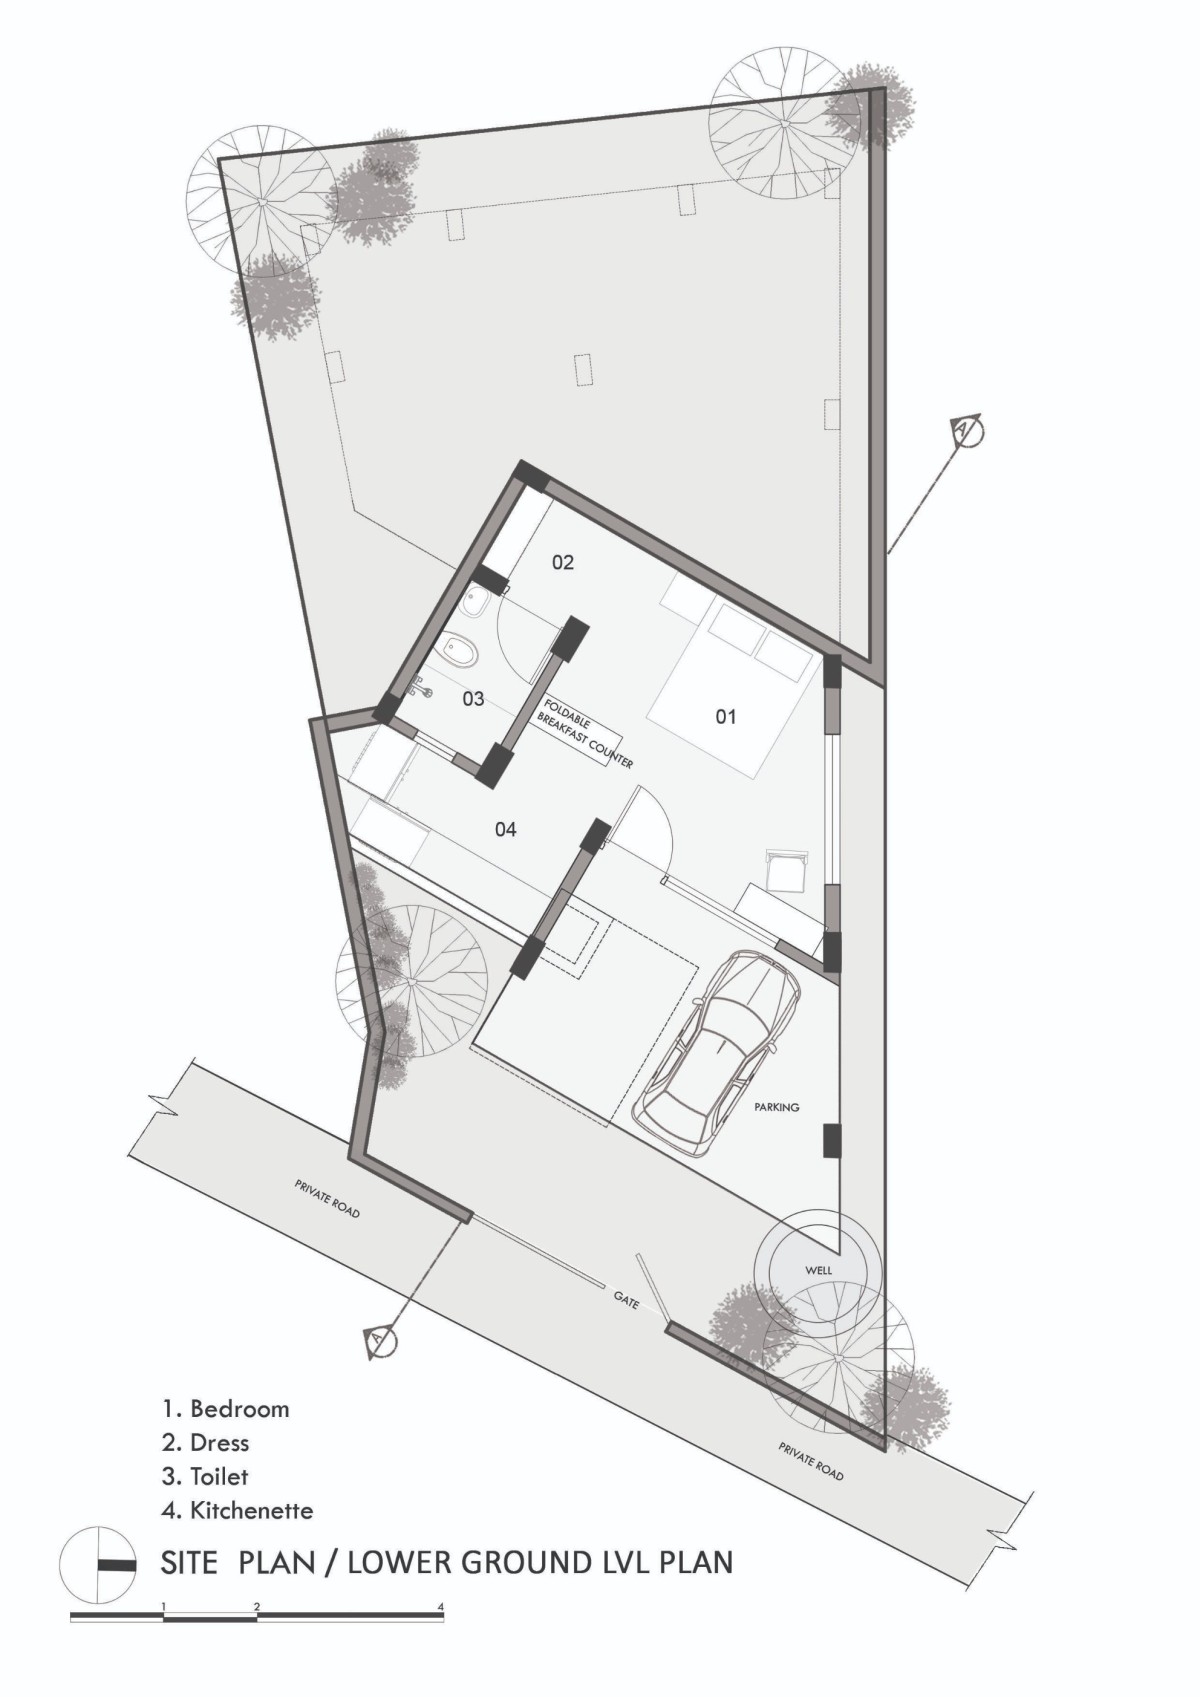 Site Plan of The N’Arrow House by Designloom Architects